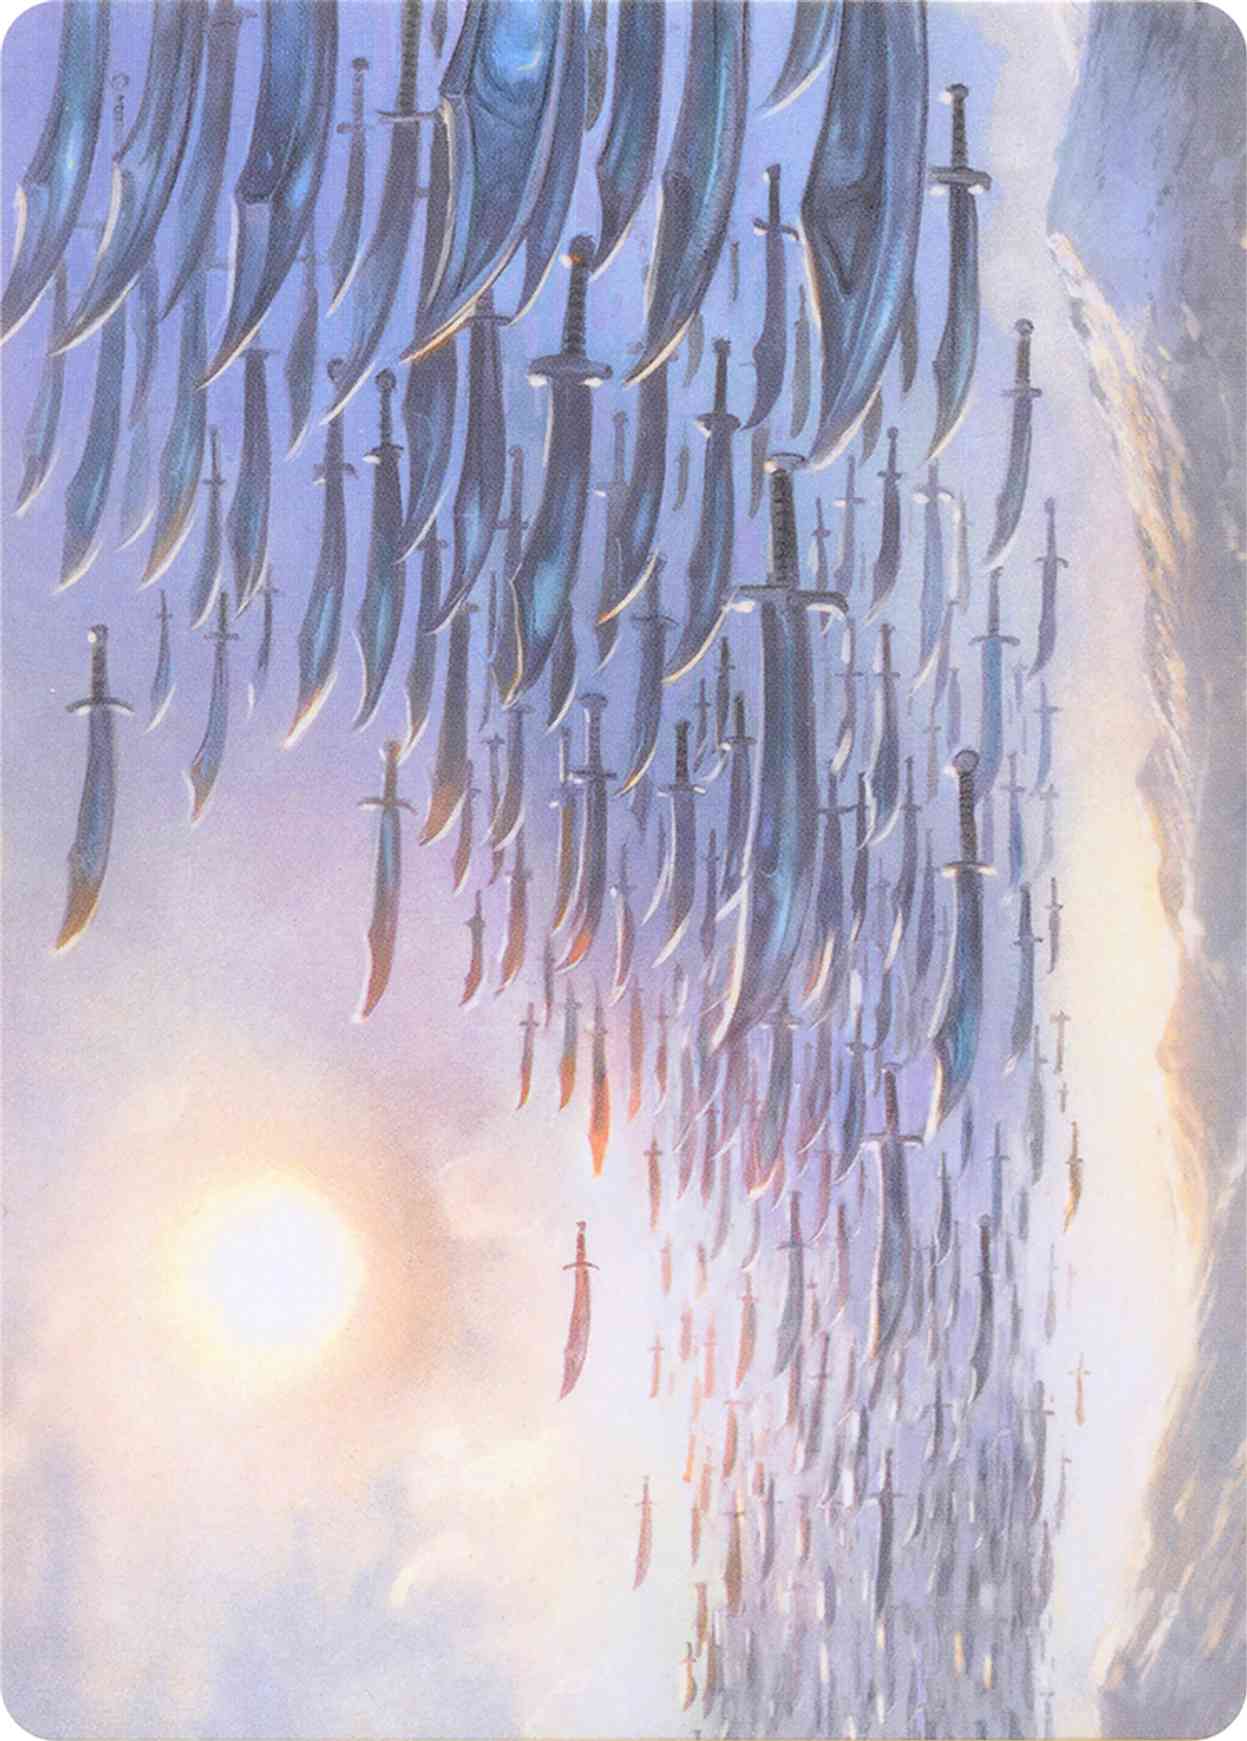 Wall of One Thousand Cuts (Art Series) magic card front